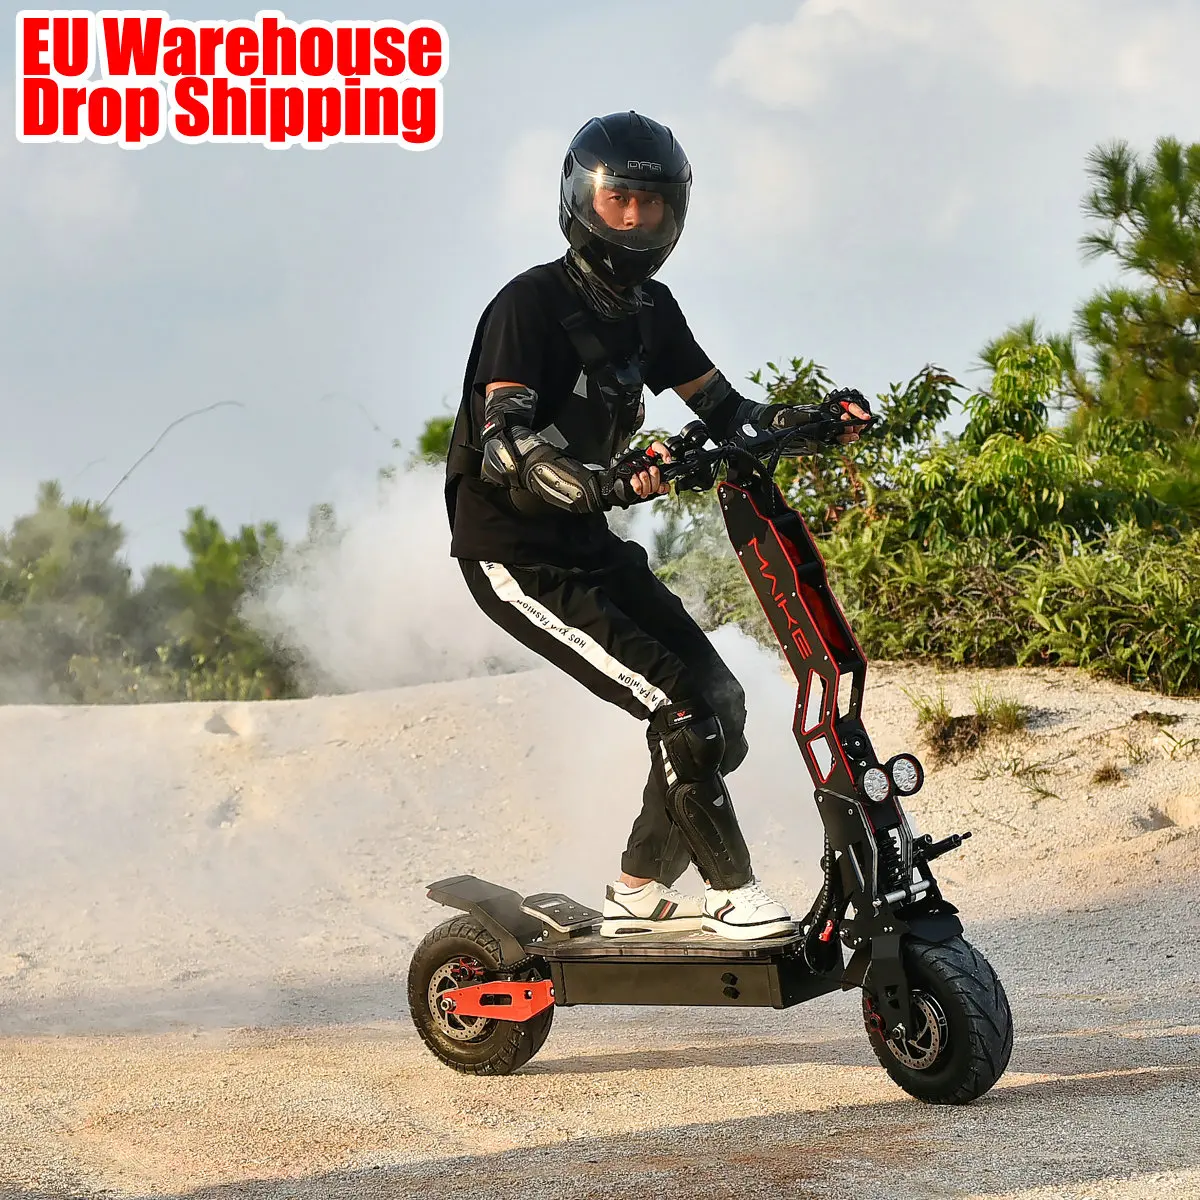 

Free Shipping maike mks dual scooter eu warehouse 13 inch wide wheel 90kmh scooter 8000w high speed scooter